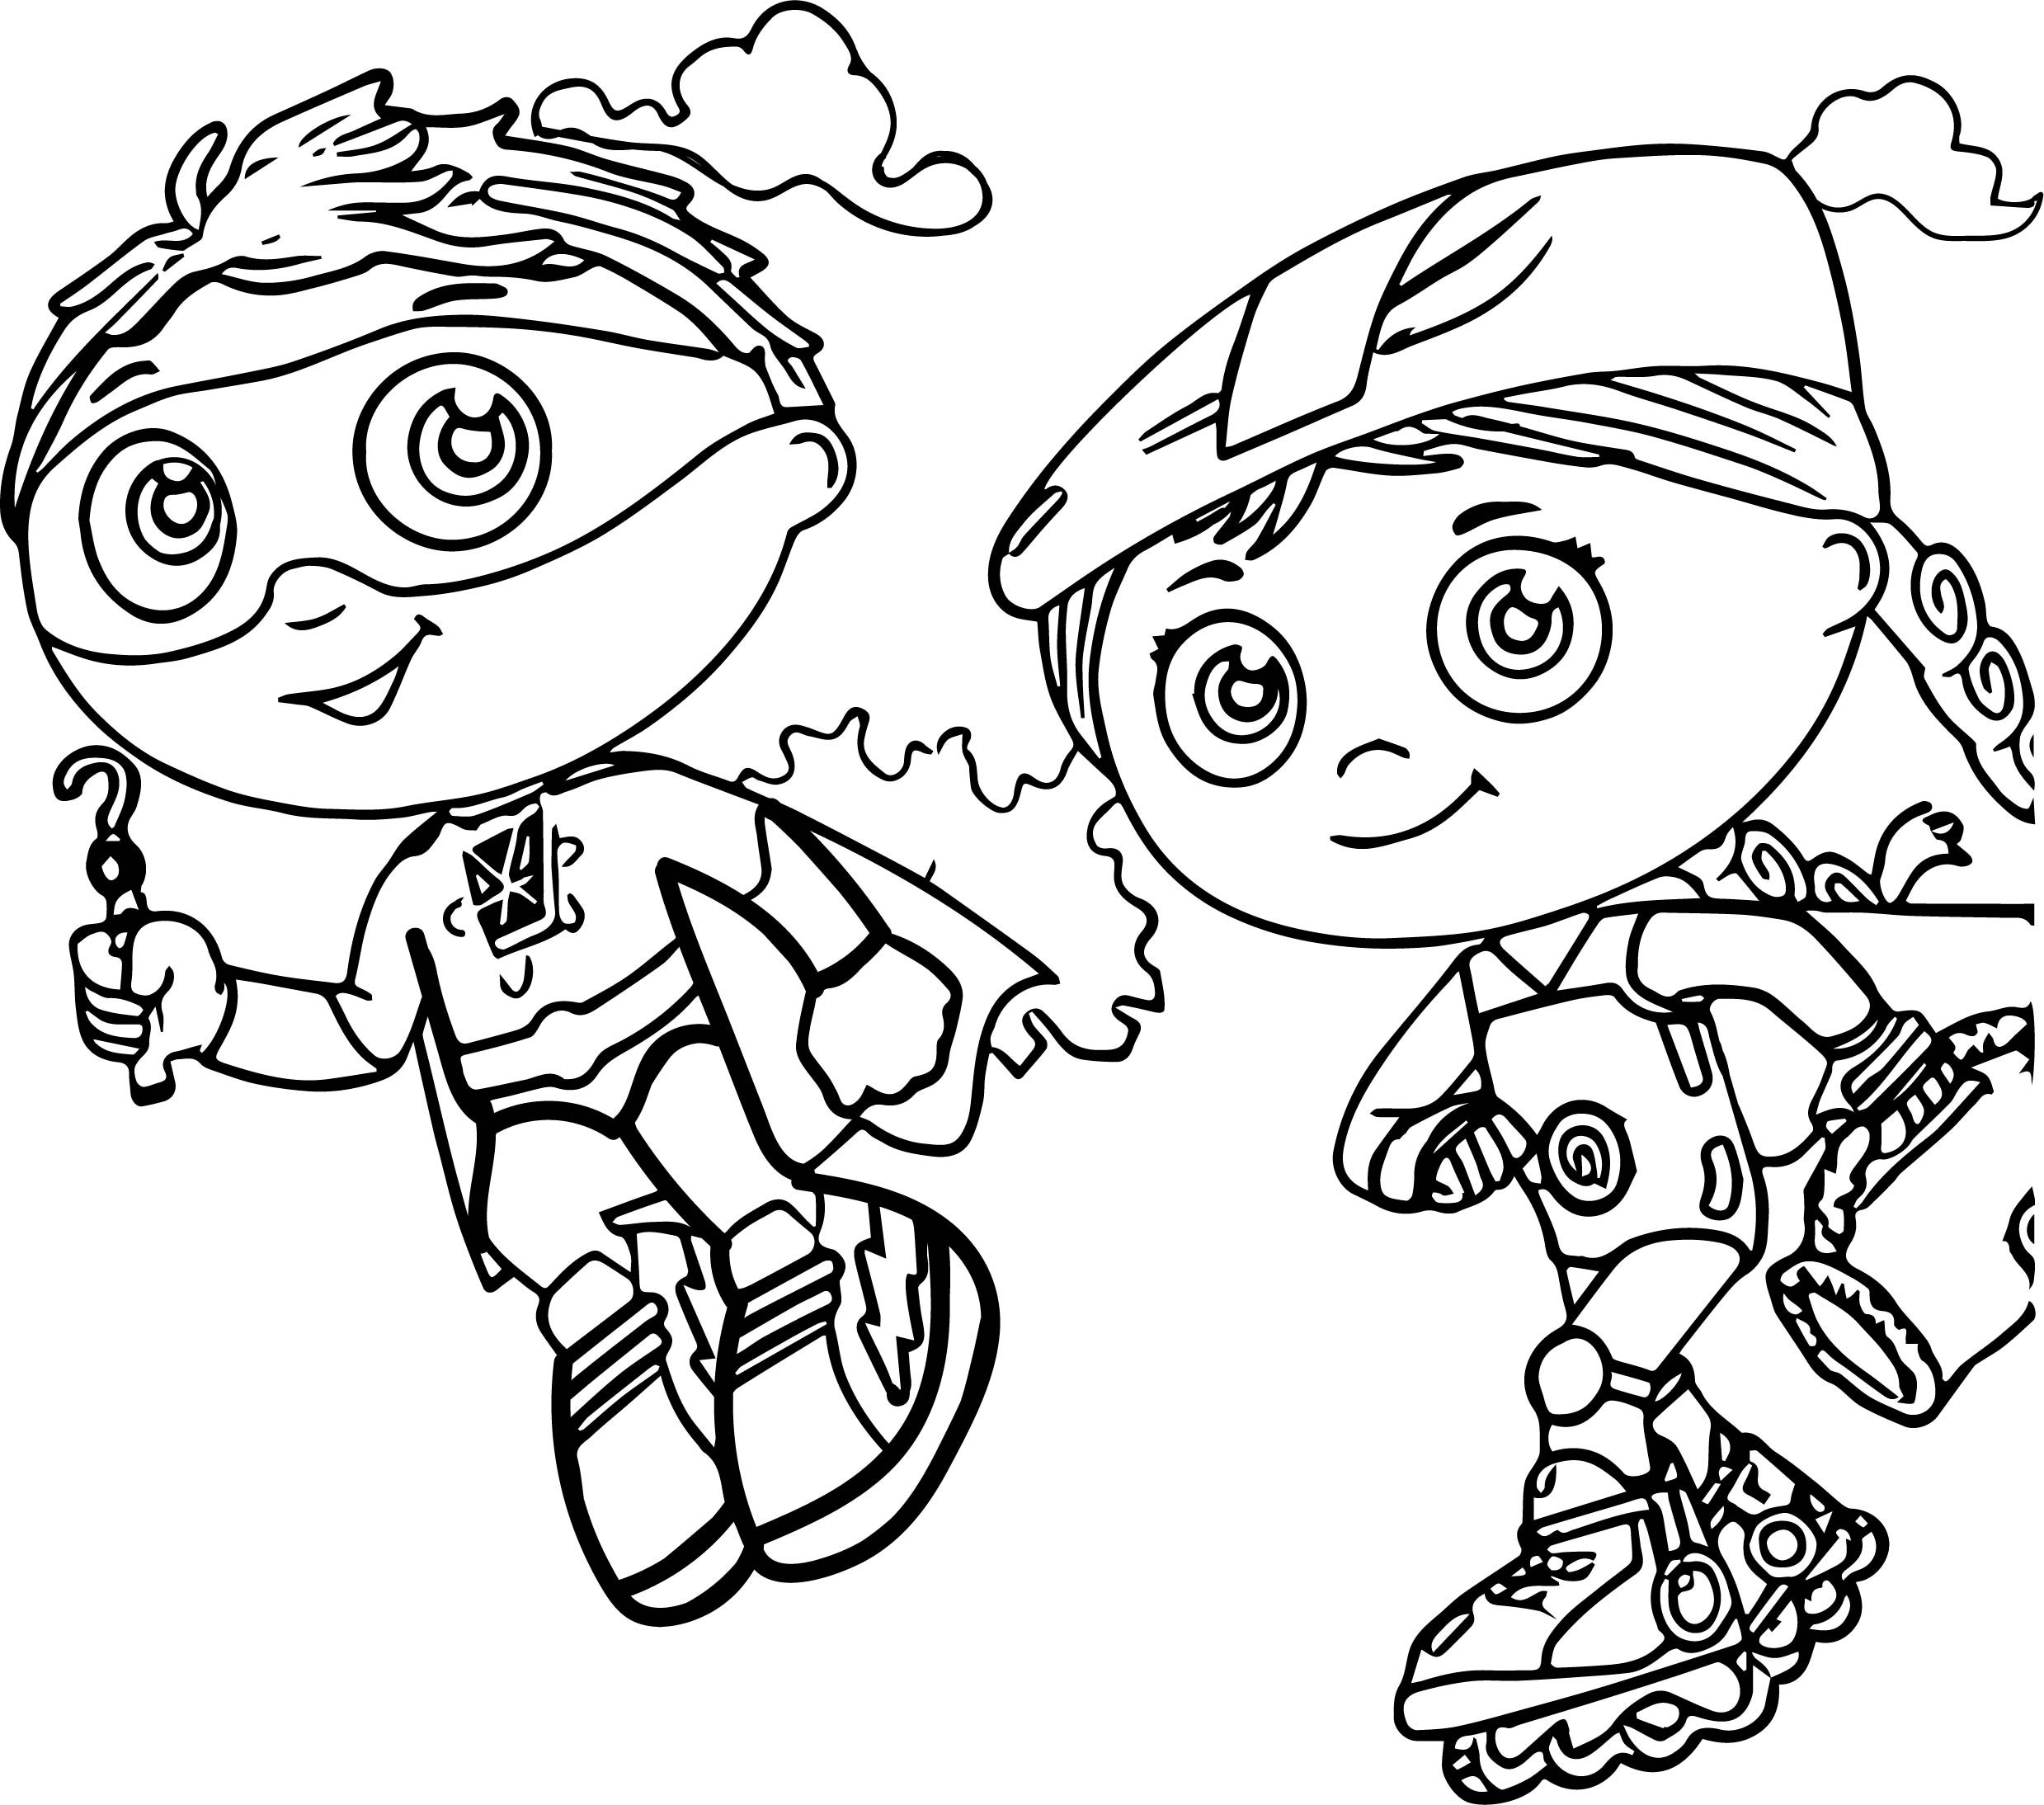 Printed Coloring Pages
 Super Why Coloring Pages Best Coloring Pages For Kids